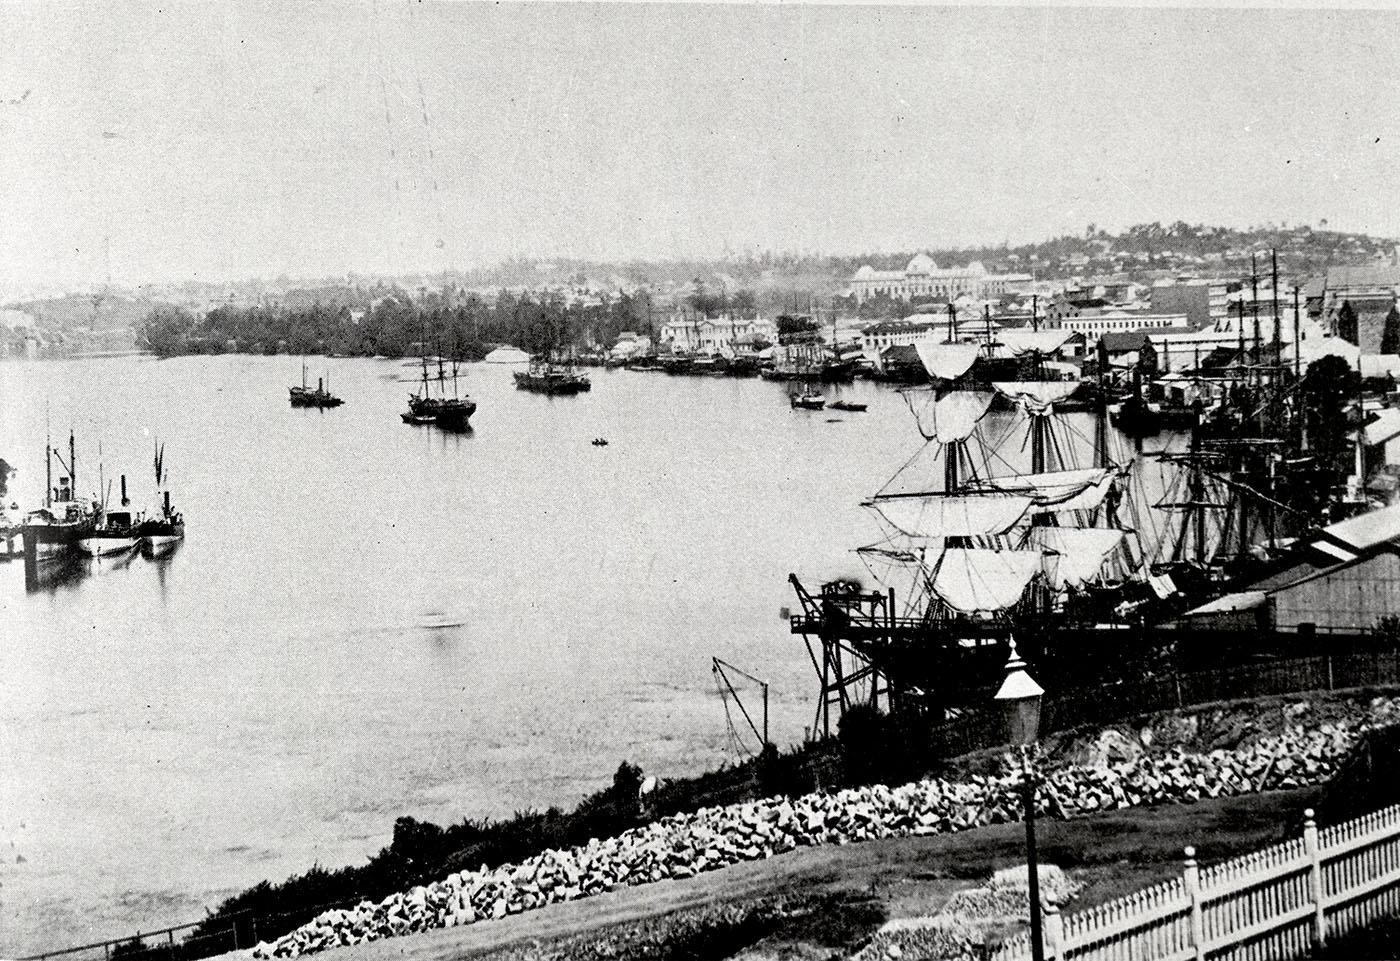 View of Brisbane River in the 19th century with large sailboats moored